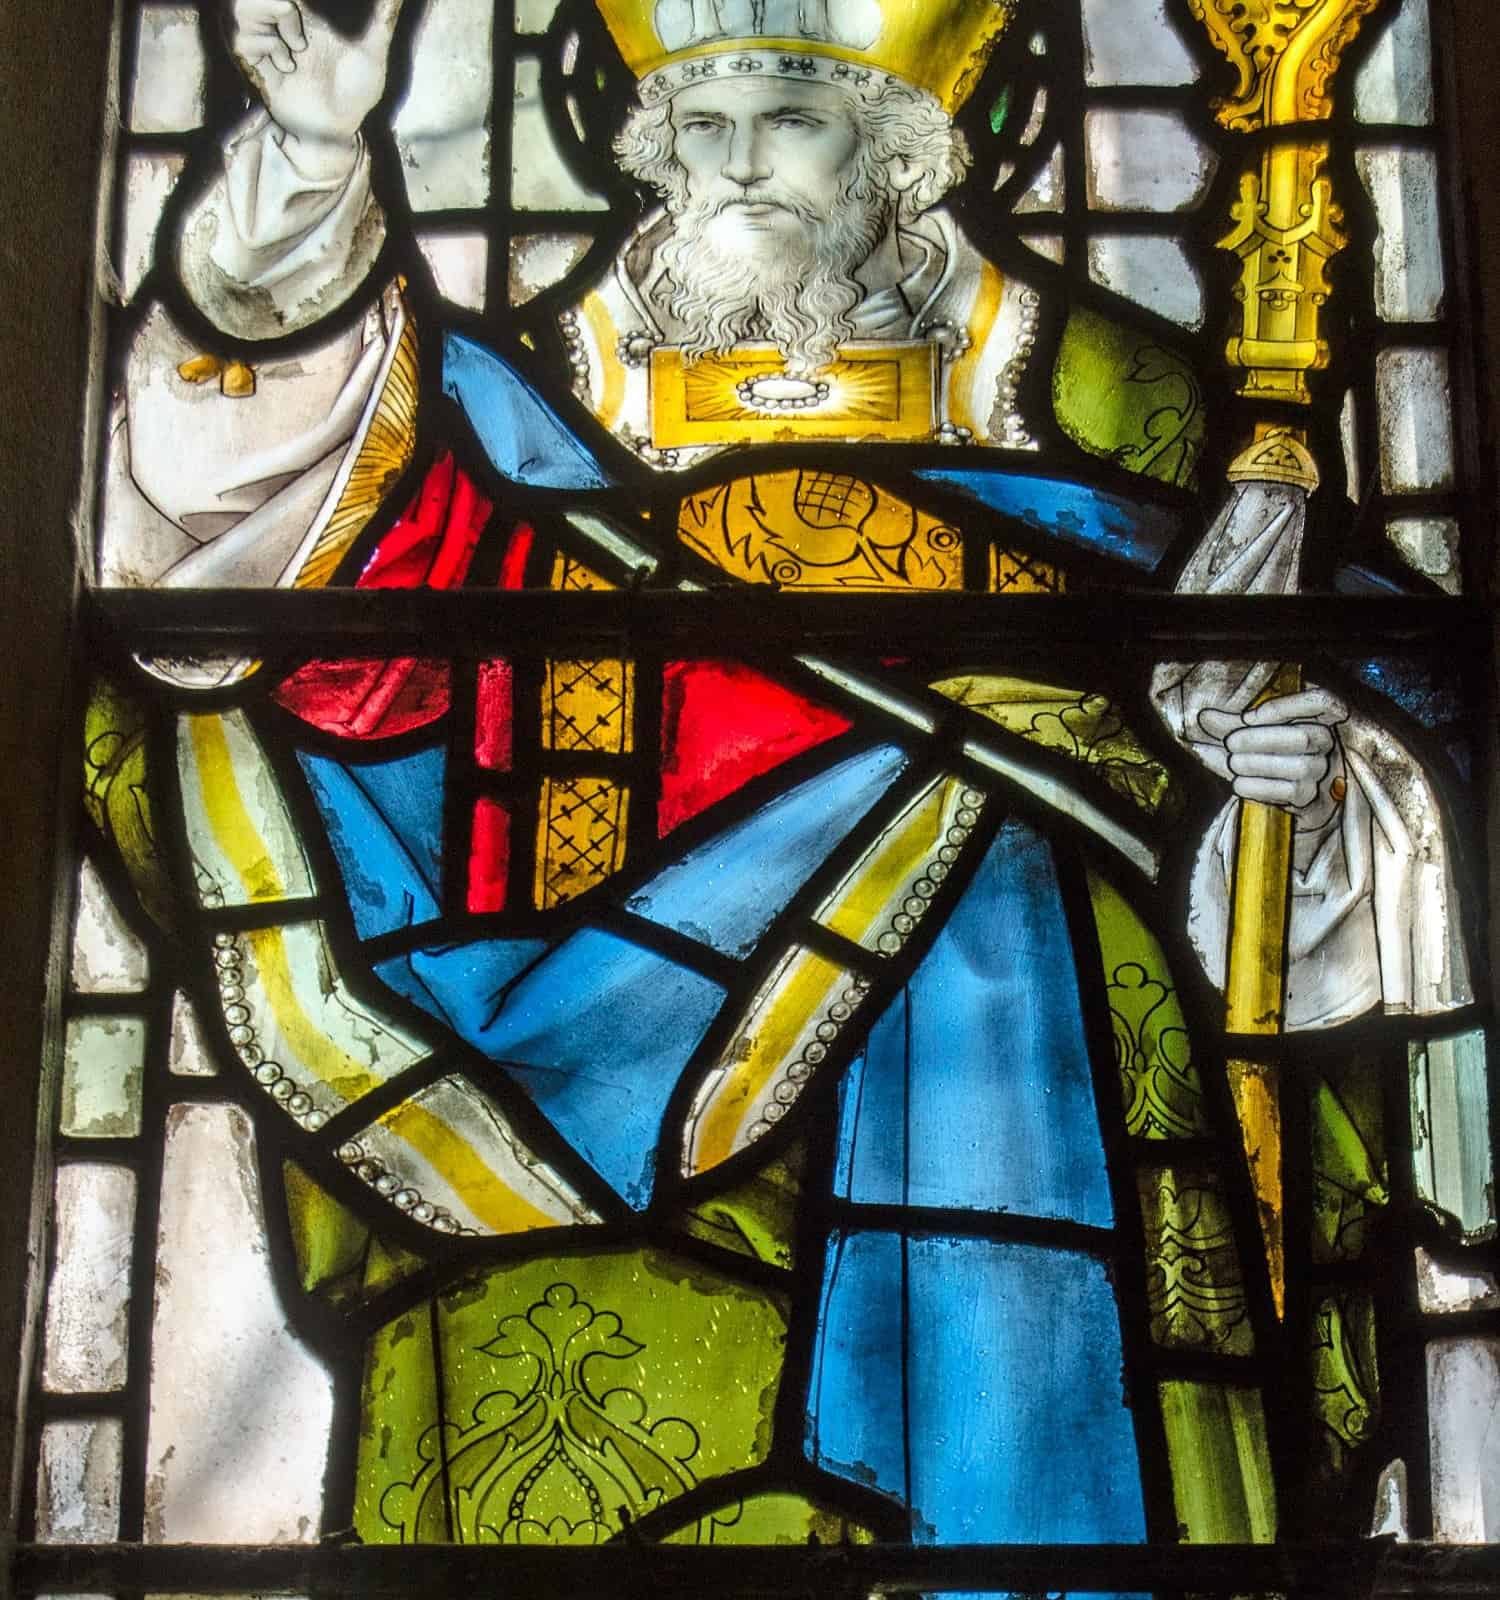 Victorian stained glass window depicting Saint Patrick, standing on one of the snakes he banished from Ireland.  On public display over 100 years.